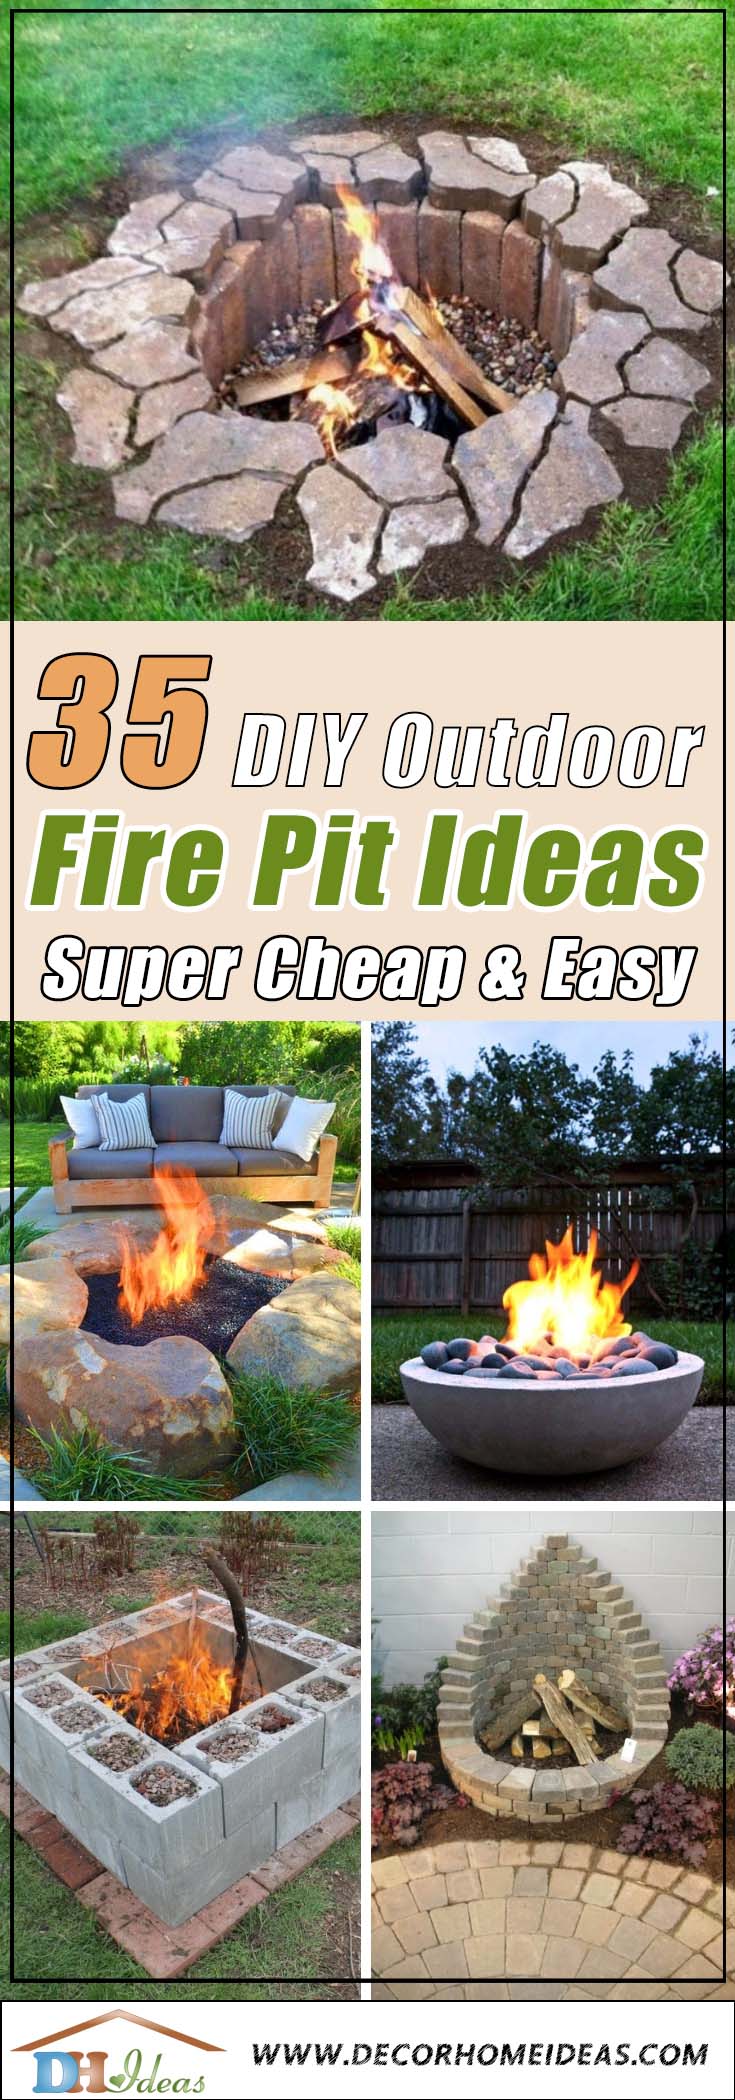 35 Easy To Do Fire Pit Ideas And, Natural Gas Fire Pit Ideas